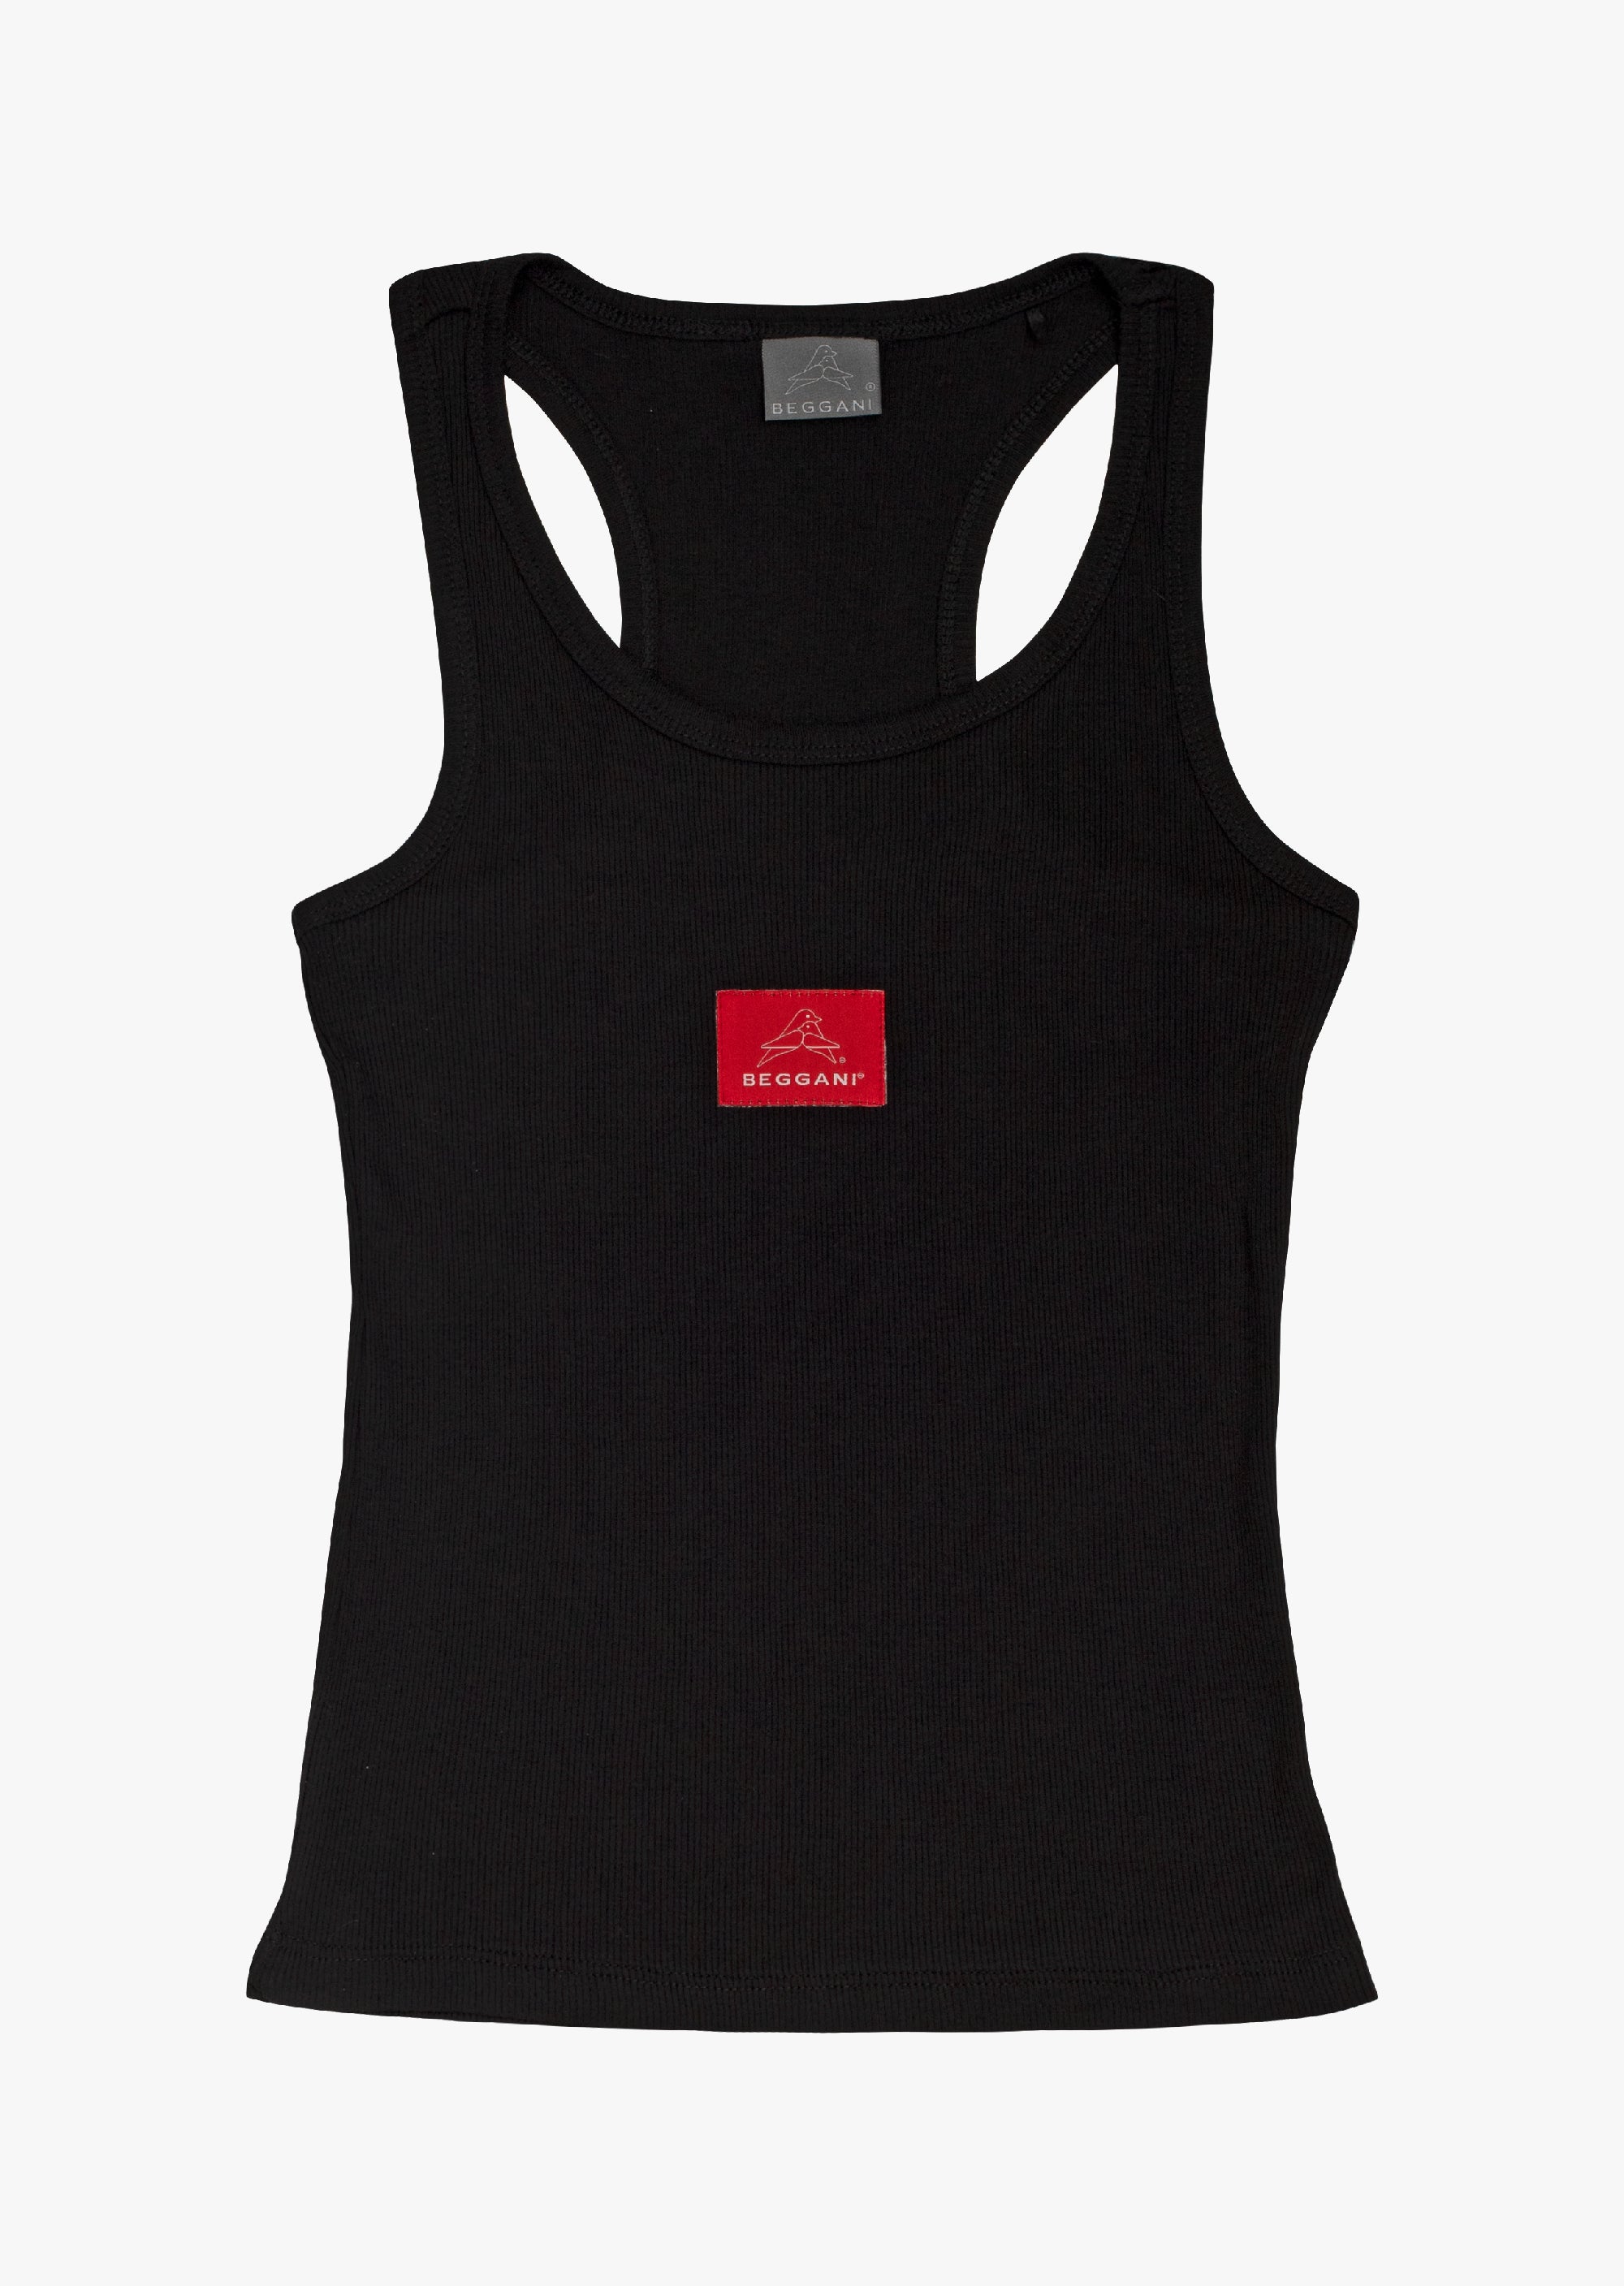 Tank top made of stretch cotton jersey with logo BEGGANI